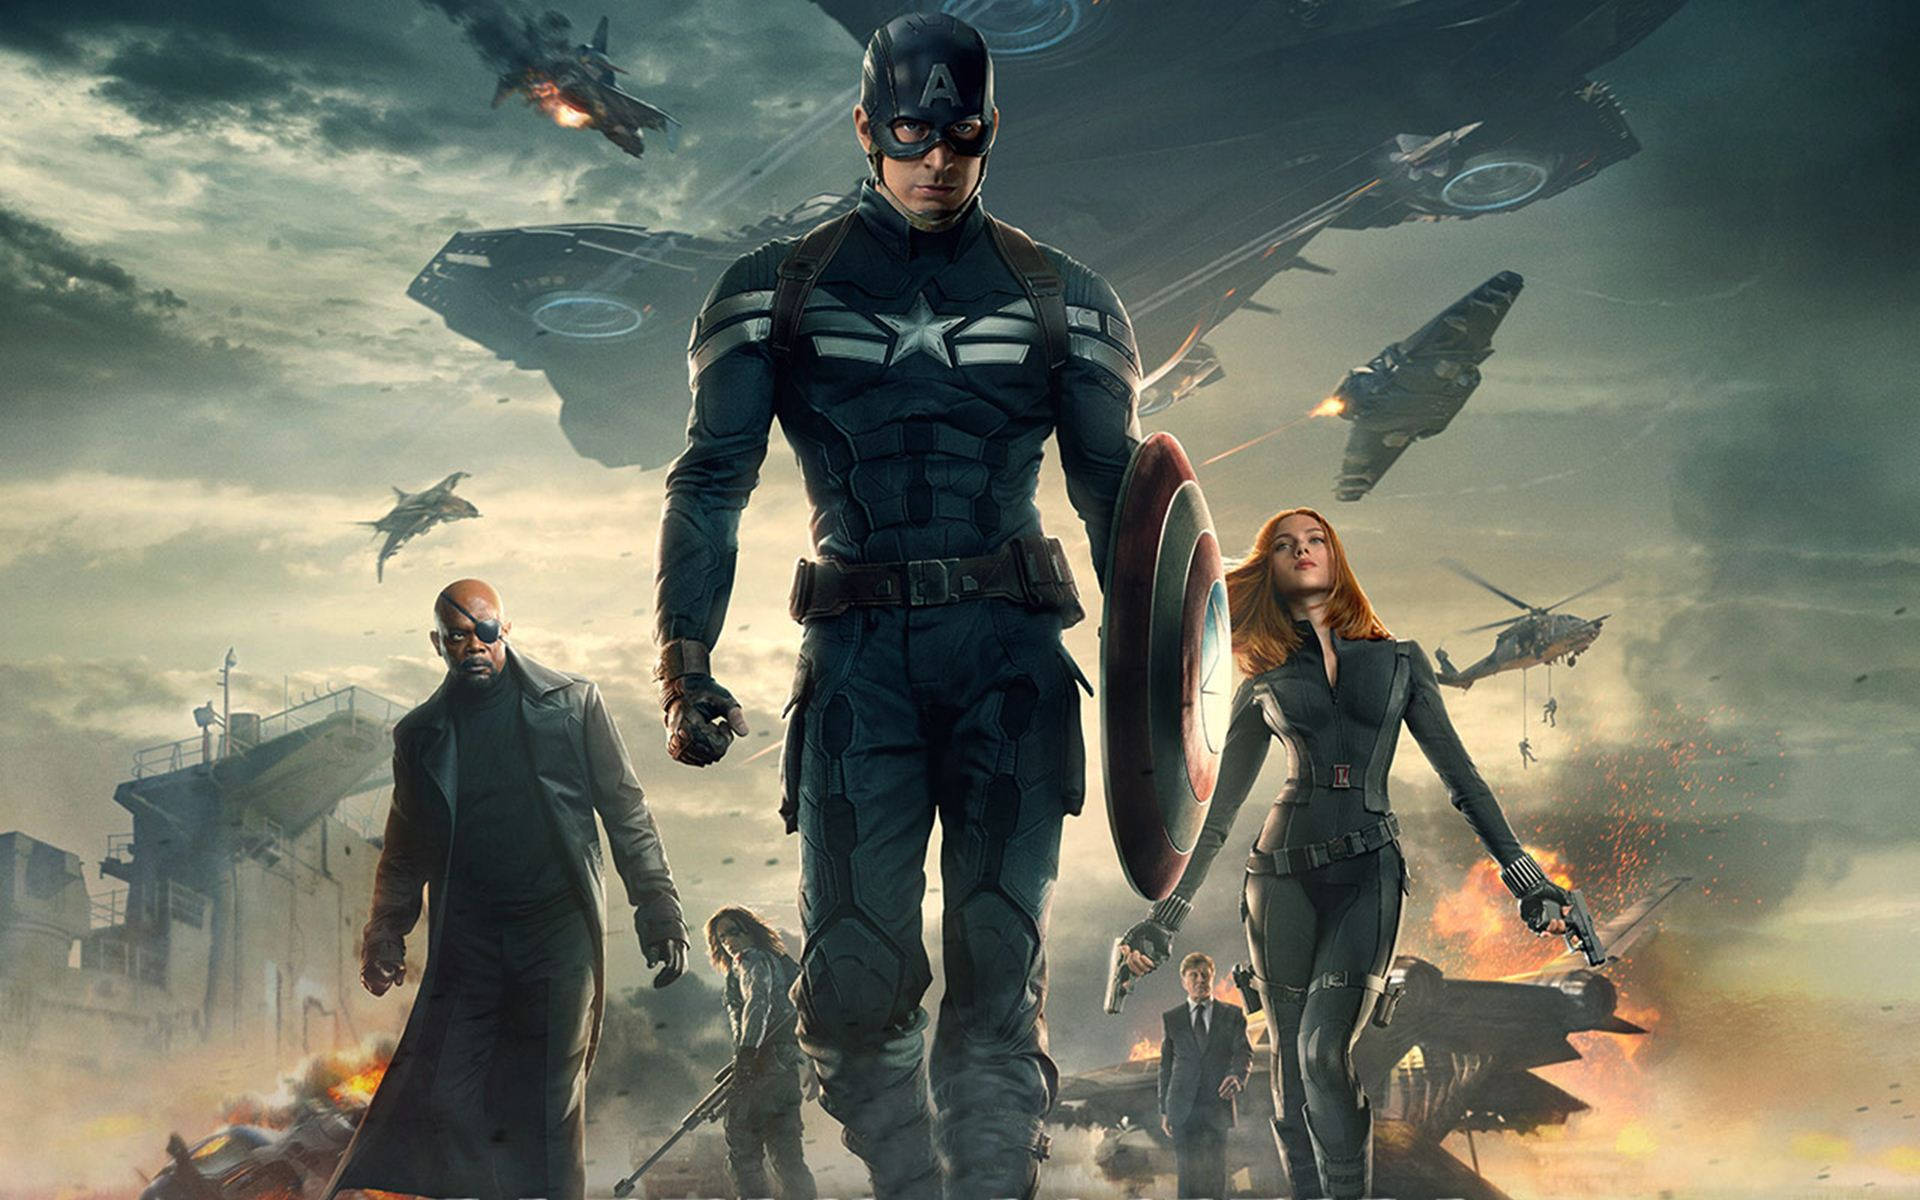 The Avengers come together to support Captain America in his fight for justice. Wallpaper